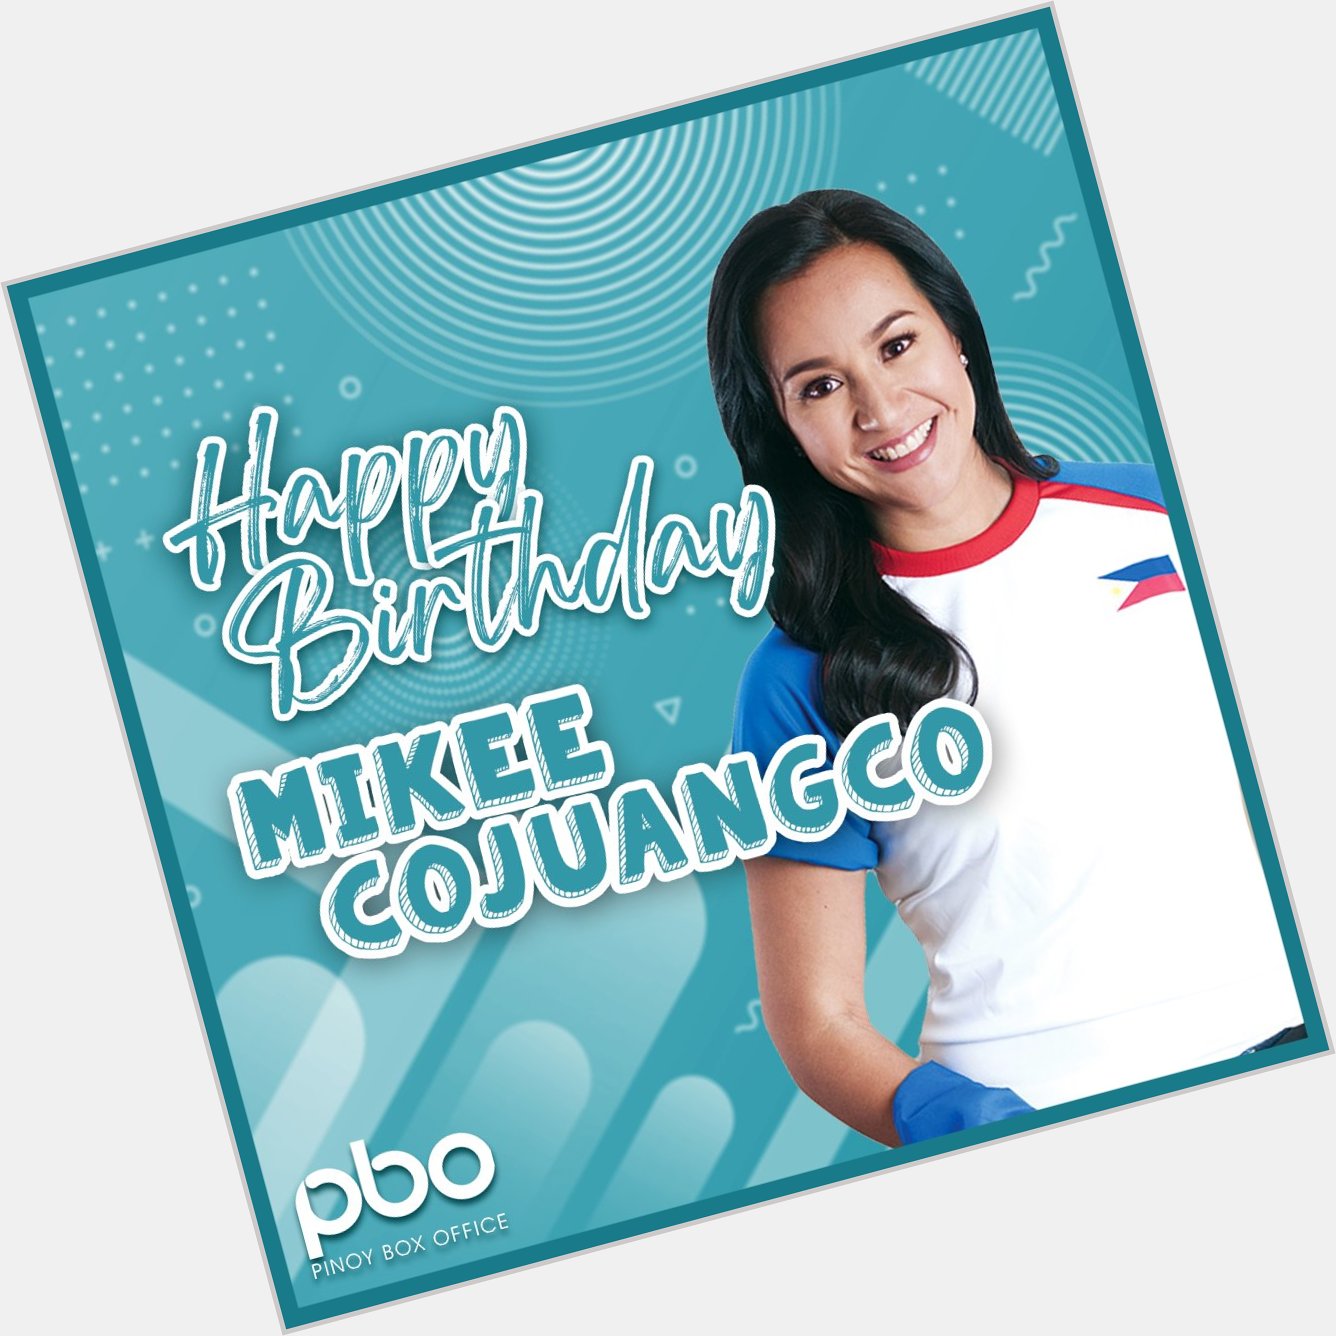 Happy birthday, Ms. Mikee Cojuangco-Jaworski! May you live your days happily and with no worries!  